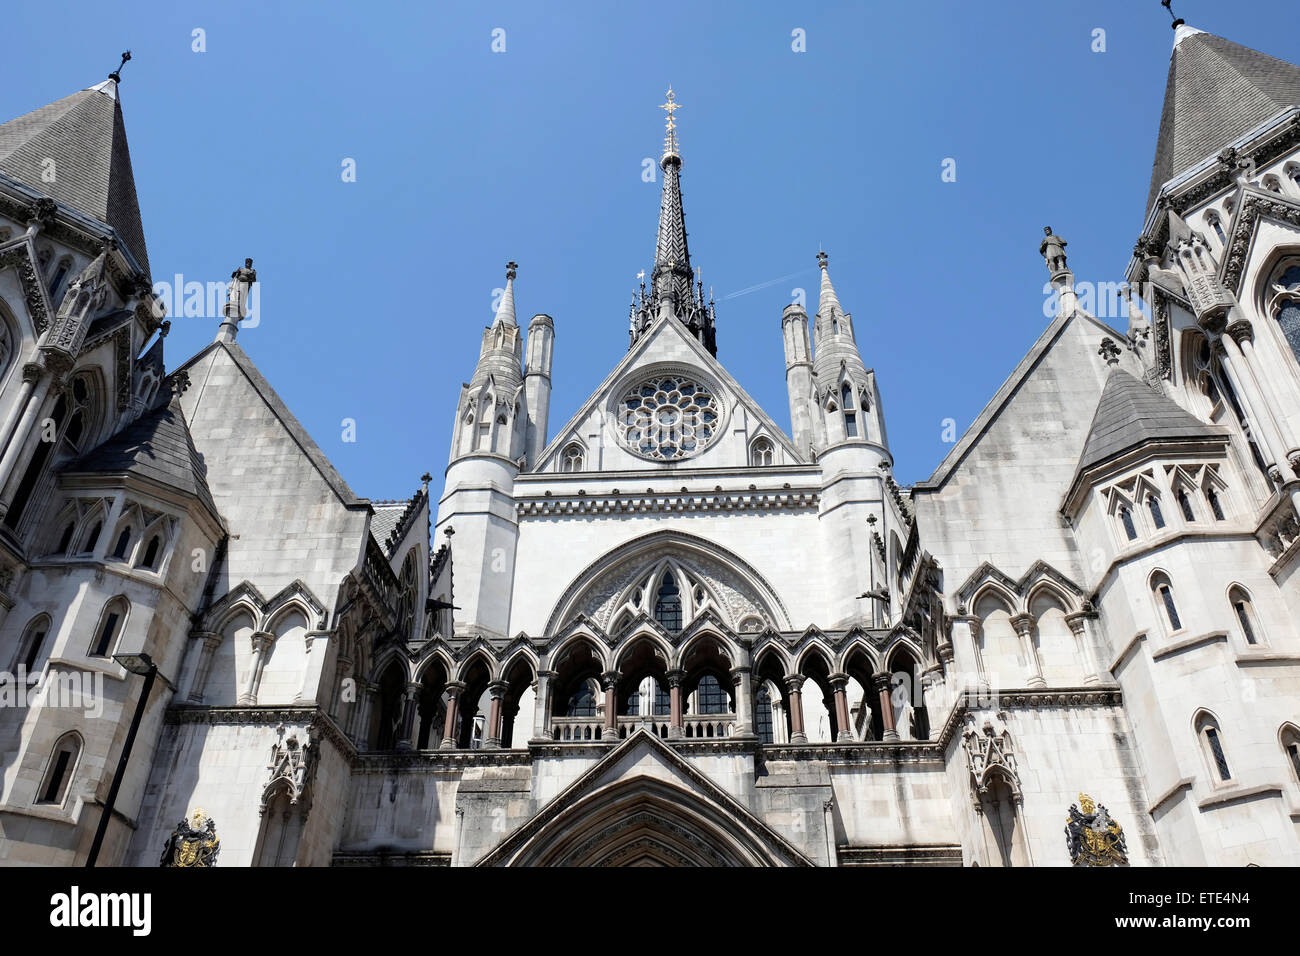 A close-up view of the Royal Courts of Justice in central London Stock Photo